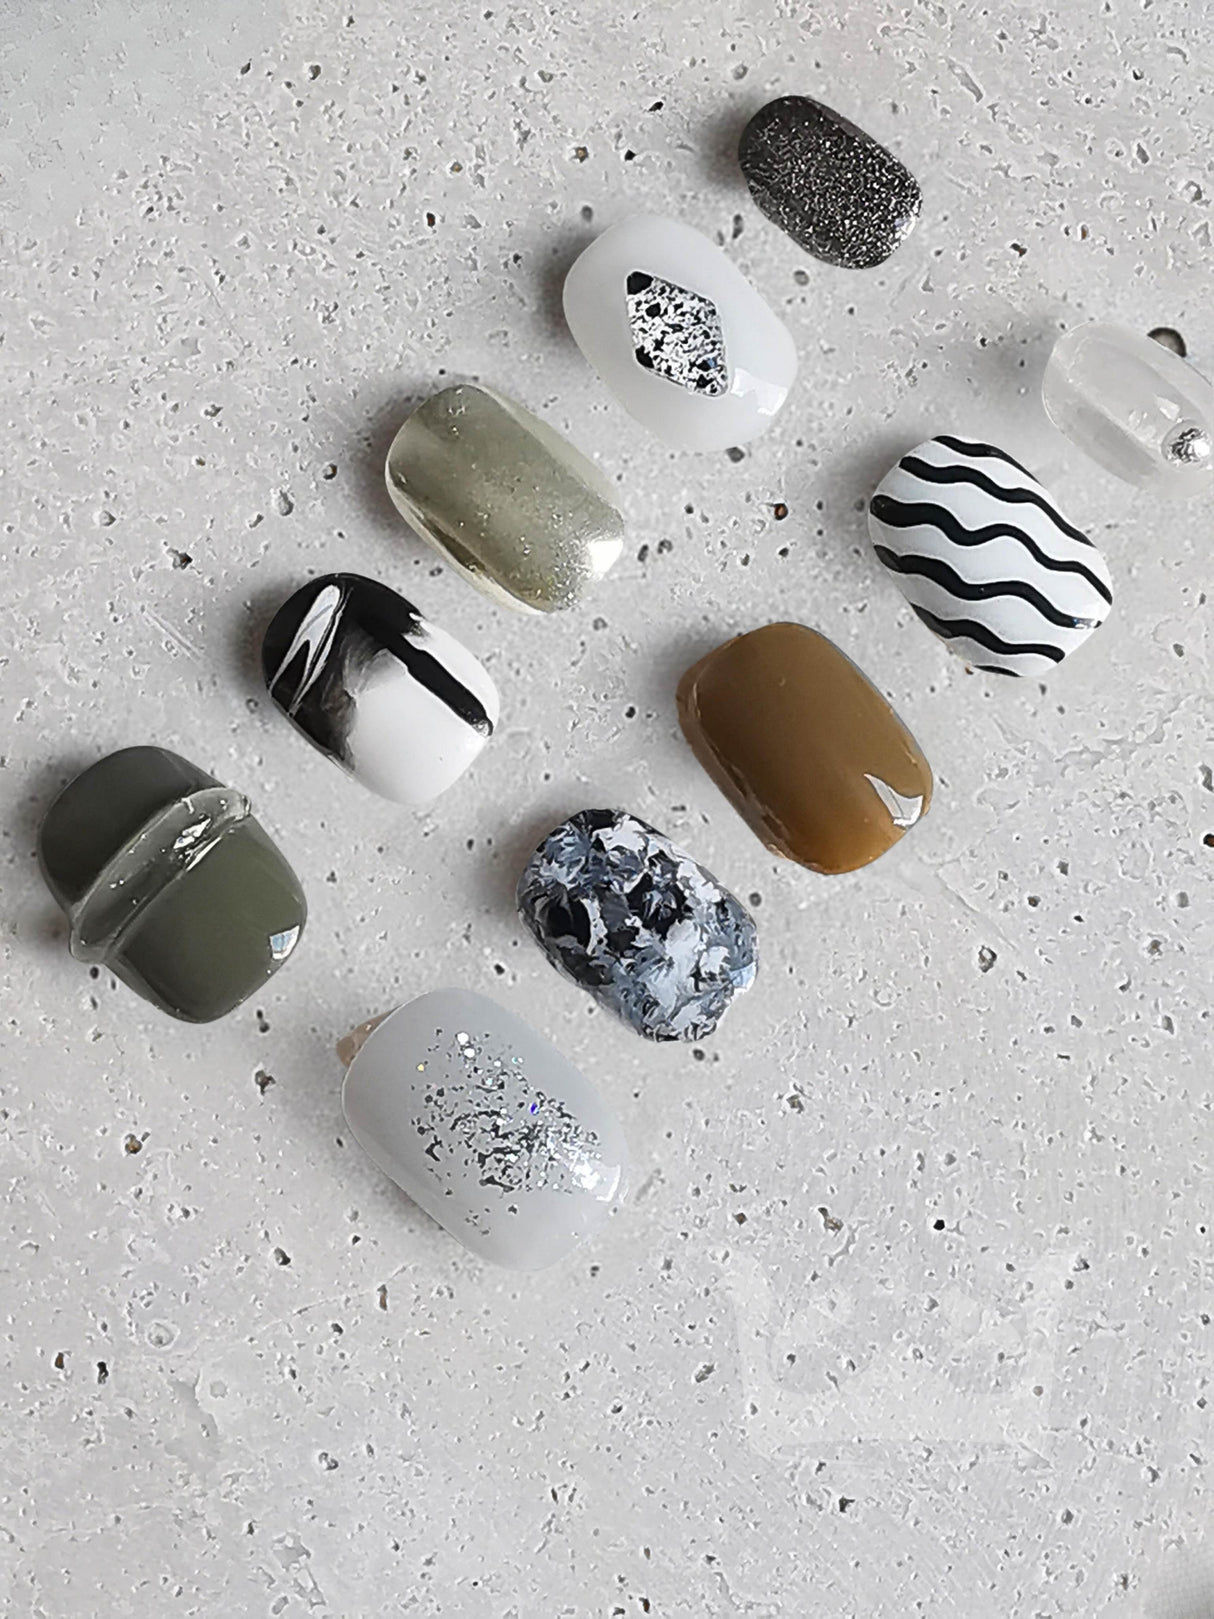 Nails with stripes, glitter, marbling effects, solid colors, and patterns can be used as samples for nail art designs. Stones can also be used for decoration or crafts.